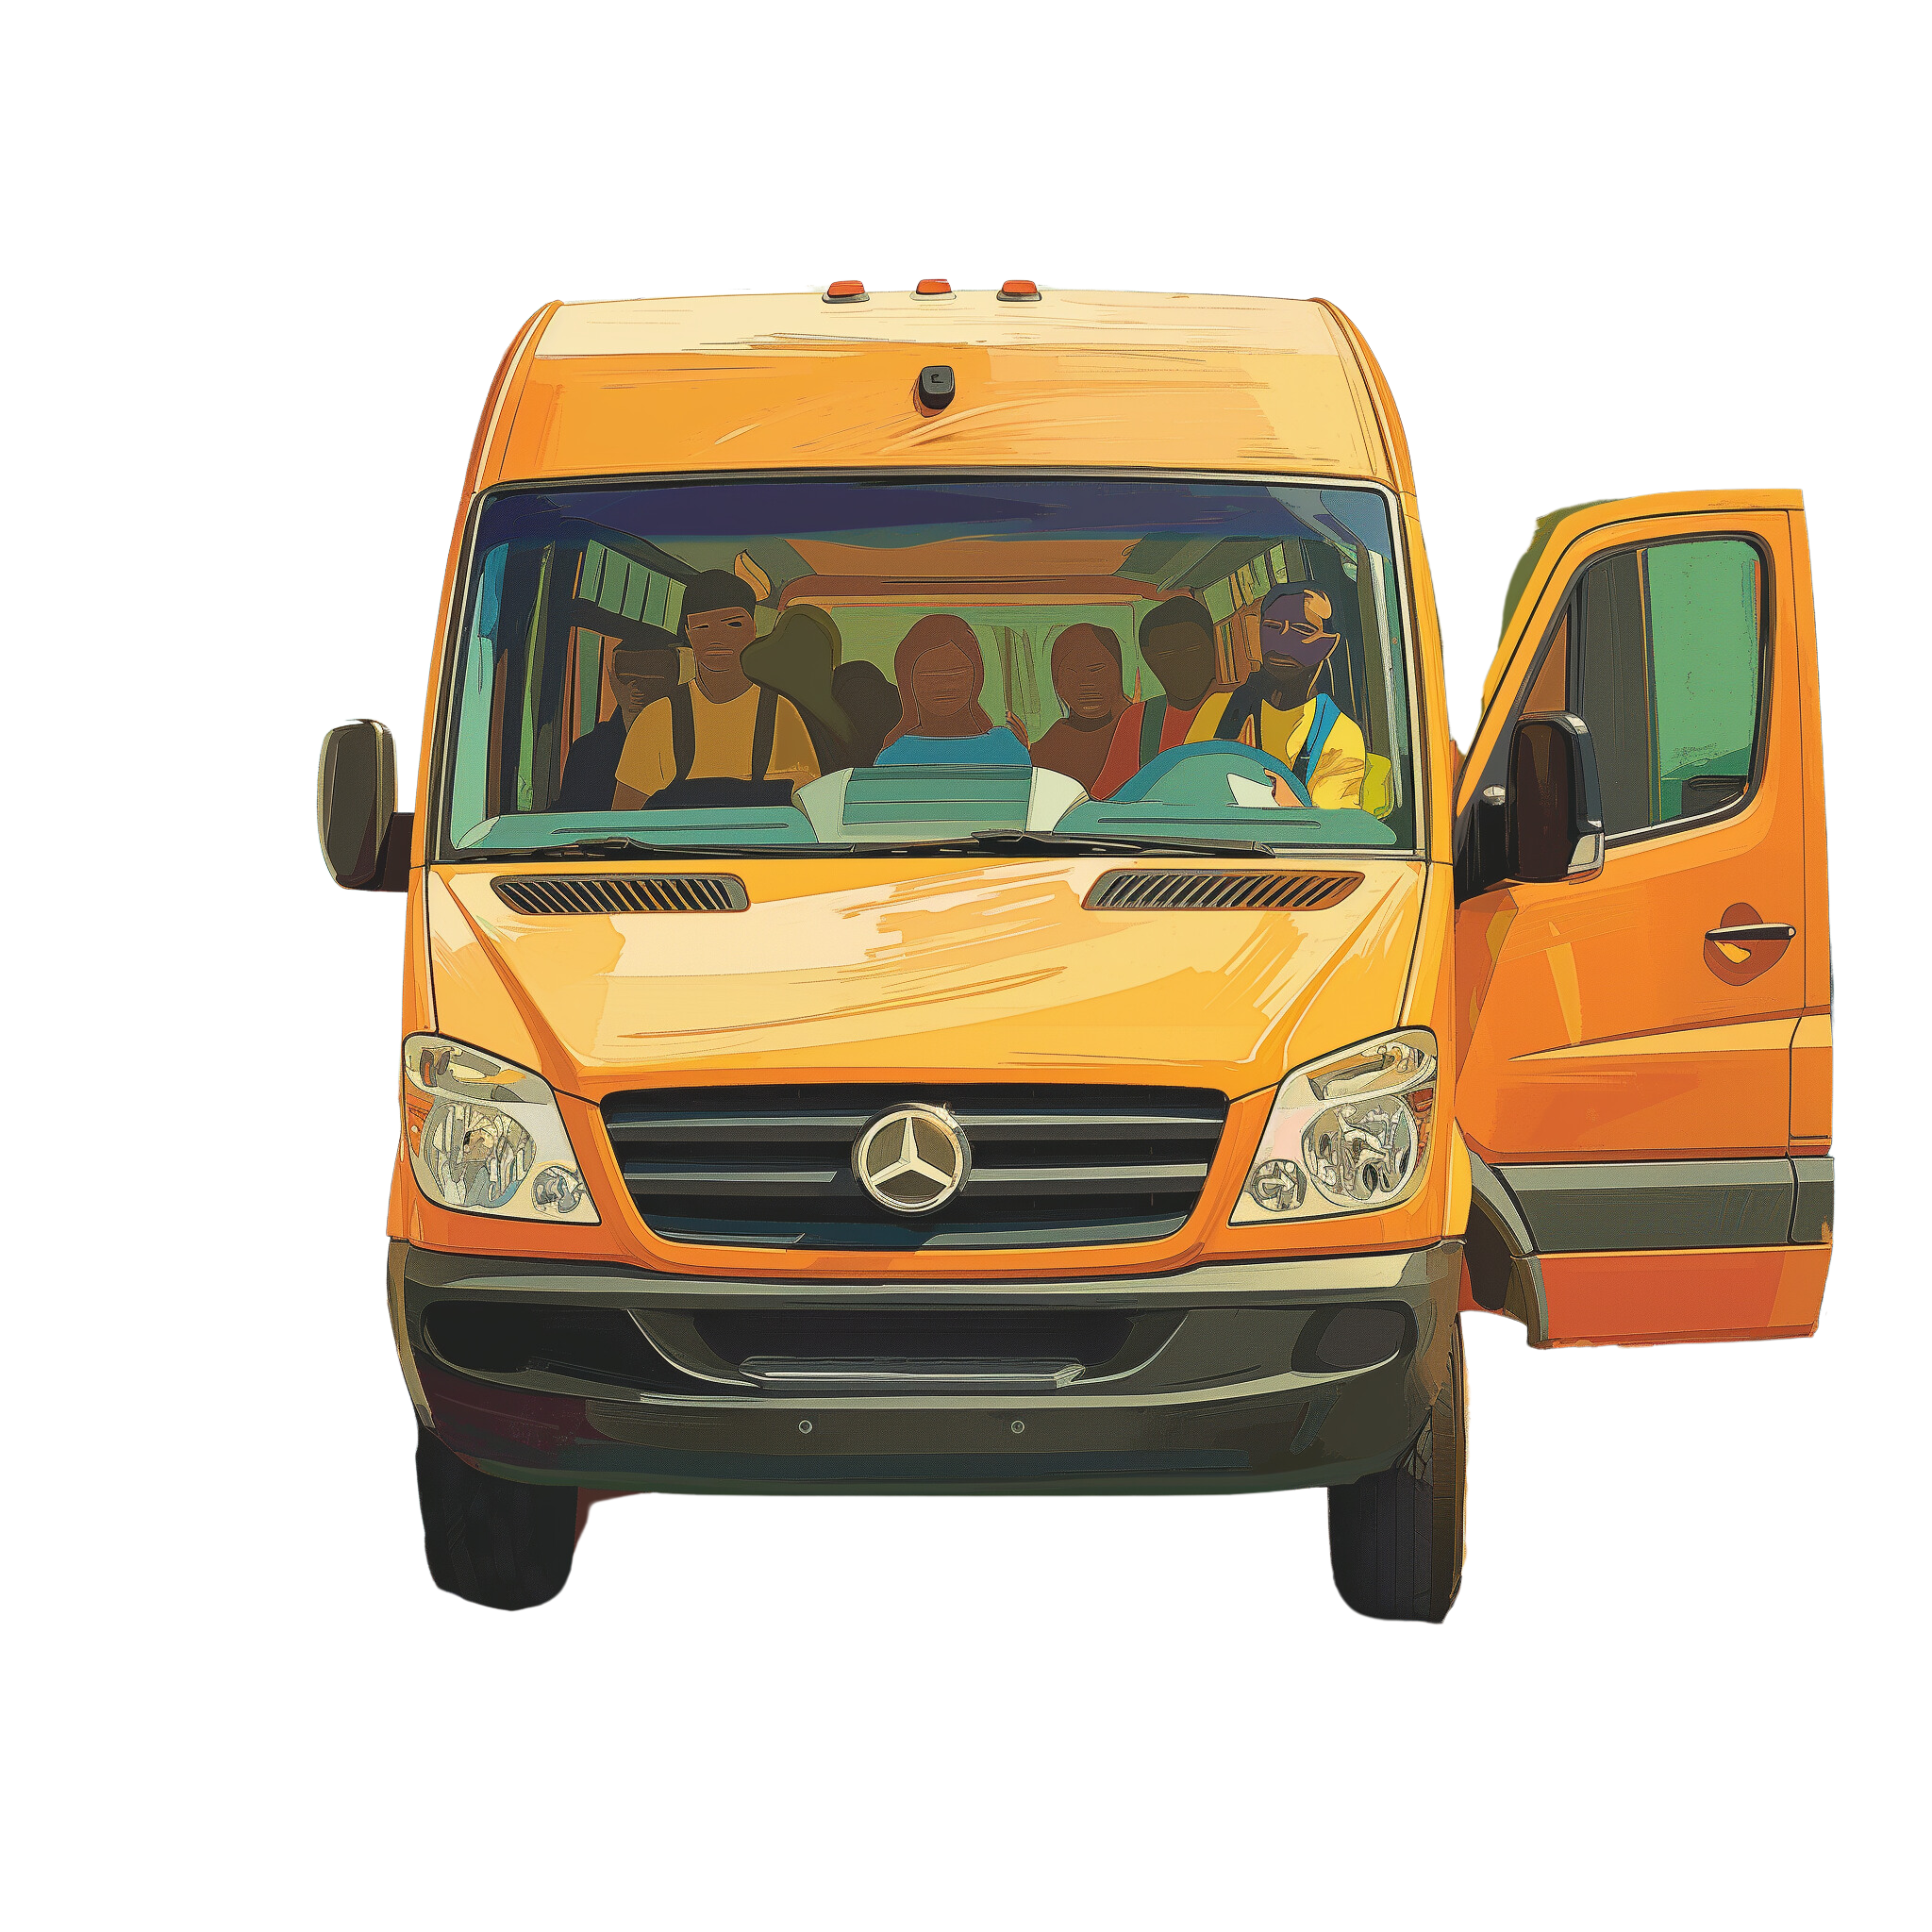 arothkegel_modern_school_van_front_view_with_kids_inside_and_ar_81a4d09f-6597-4929-87f2-f0db6a7d484c - Edited